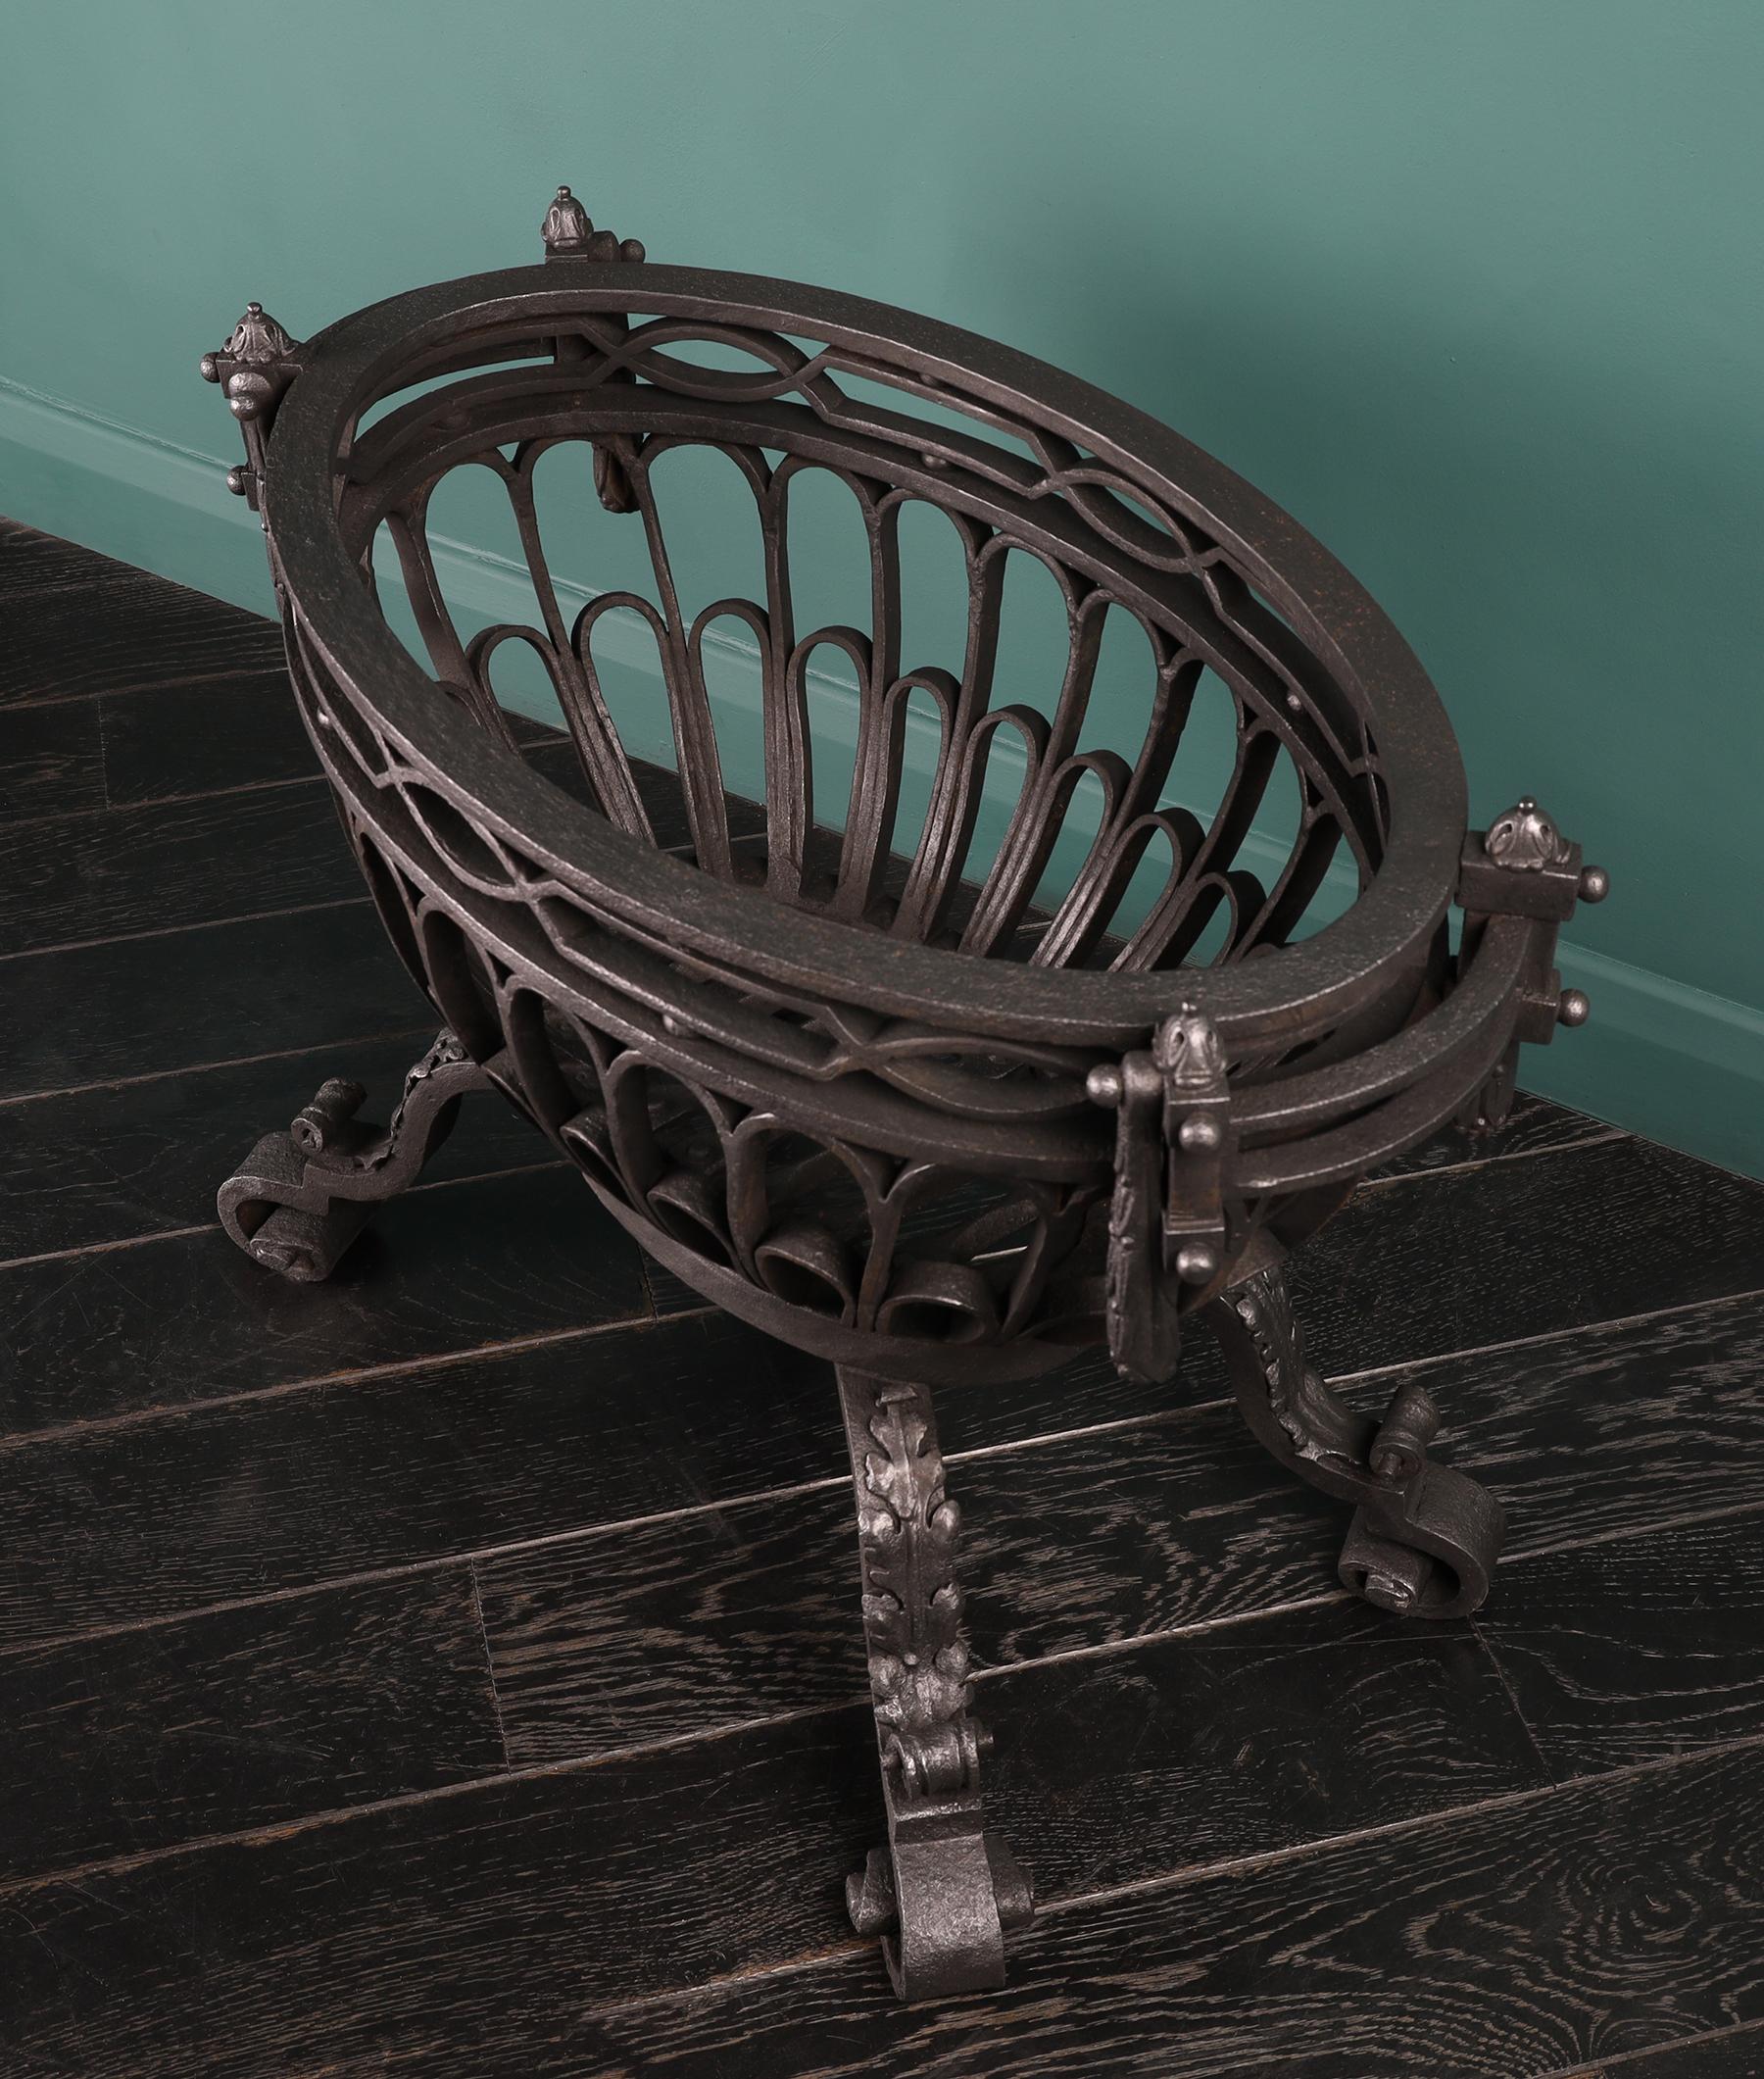 A beautifully constructed oval wrought iron fire grate of brazier form set on four repousse adorned scrolled legs. Reed and berry drop handle detail. Finished in black graphite.

Circa Mid-19th Century.